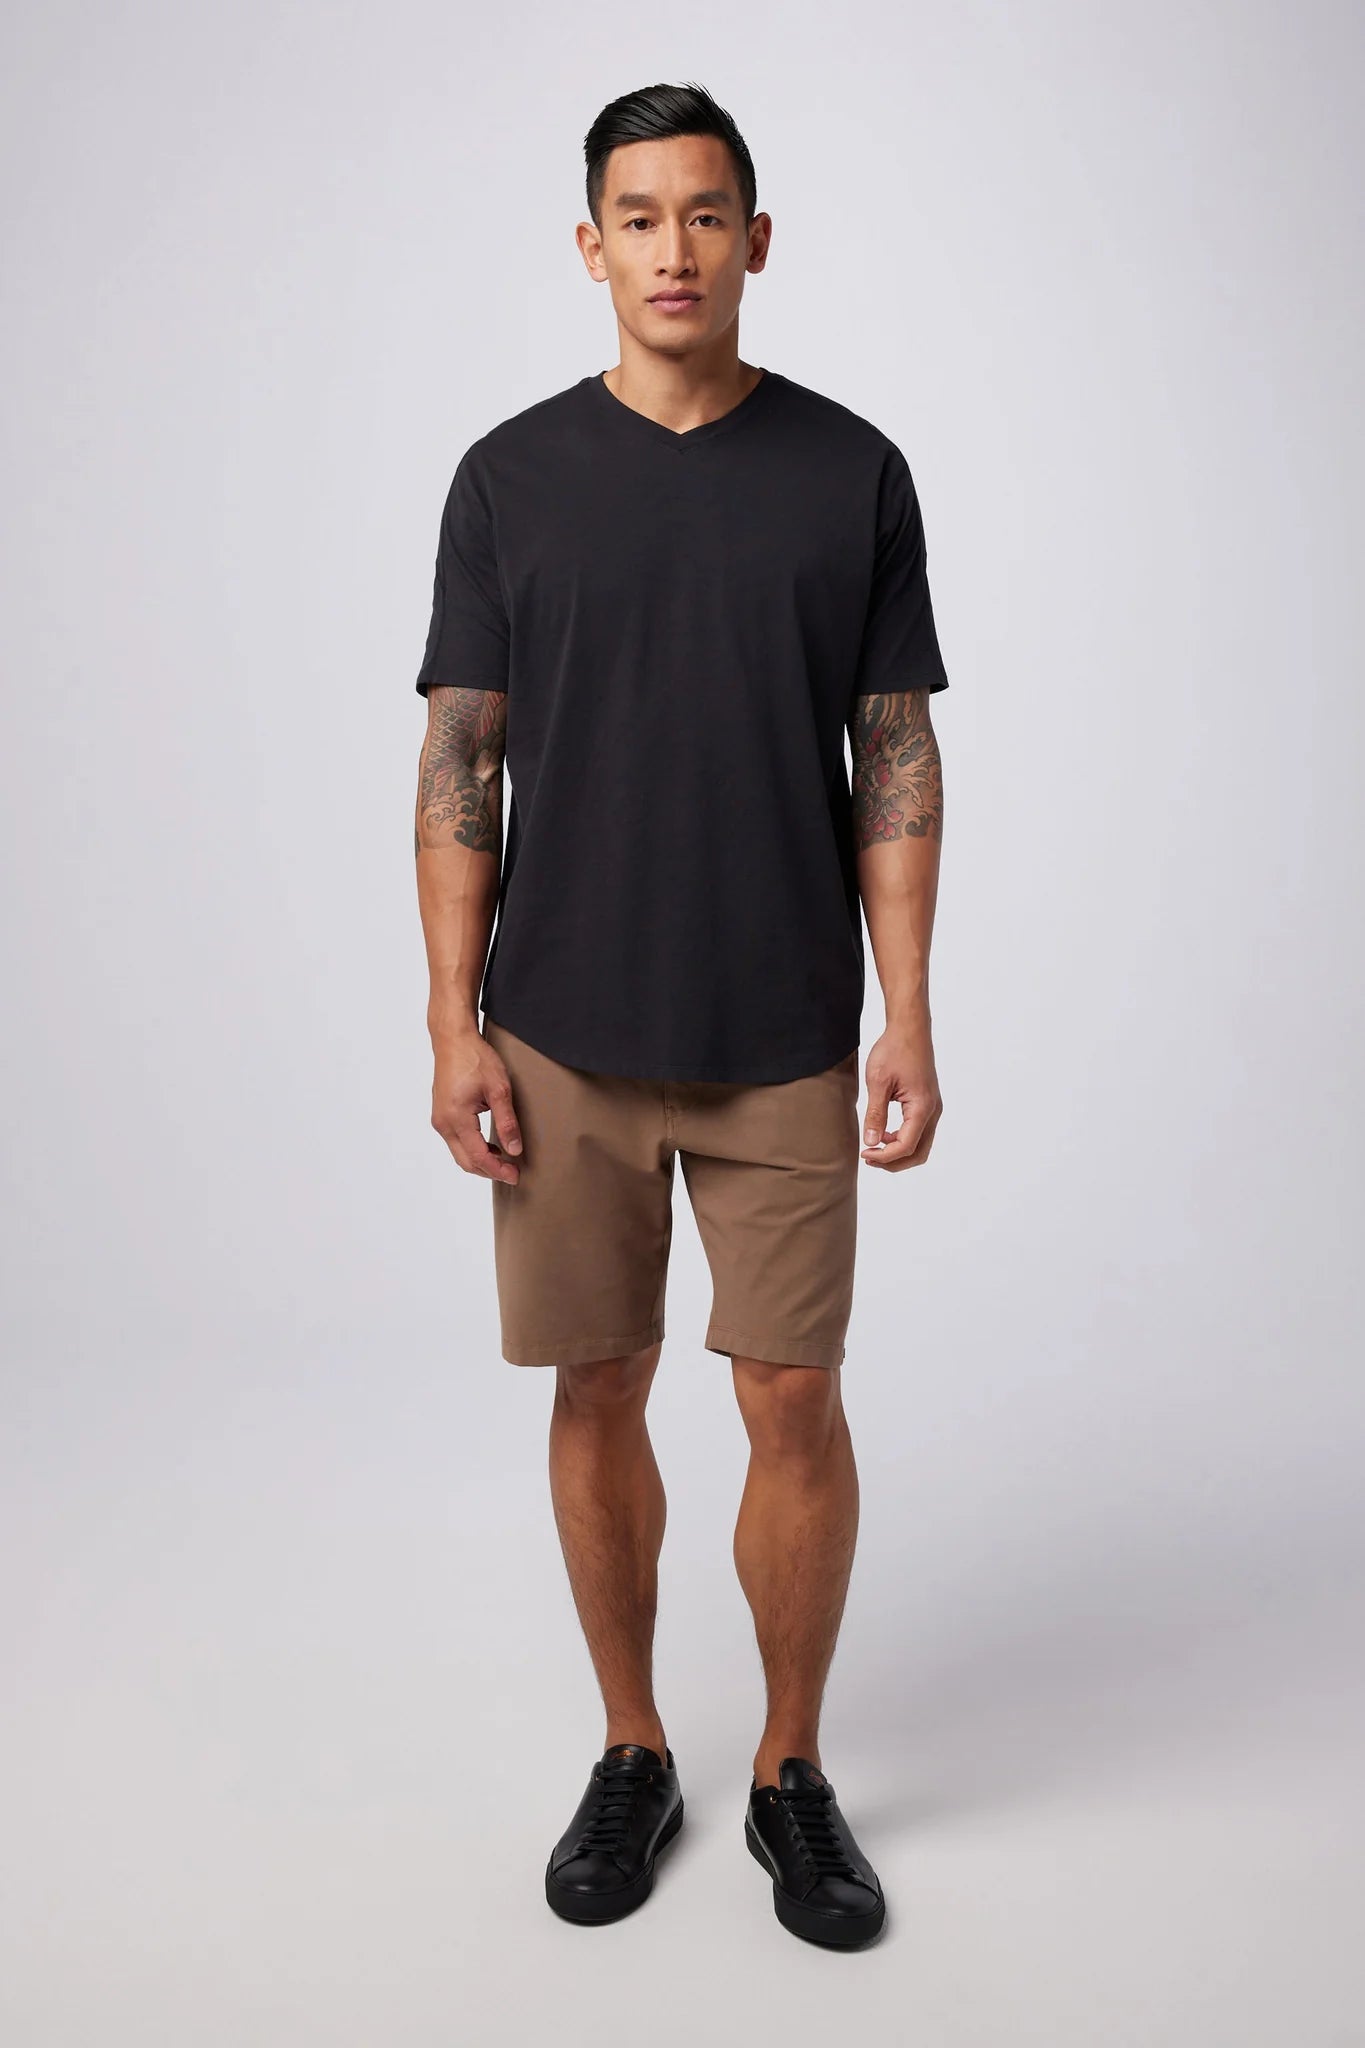 A wardrobe staple, our high v-neck t-shirt in soft, cotton jersey is as versatile as it is comfortable. 